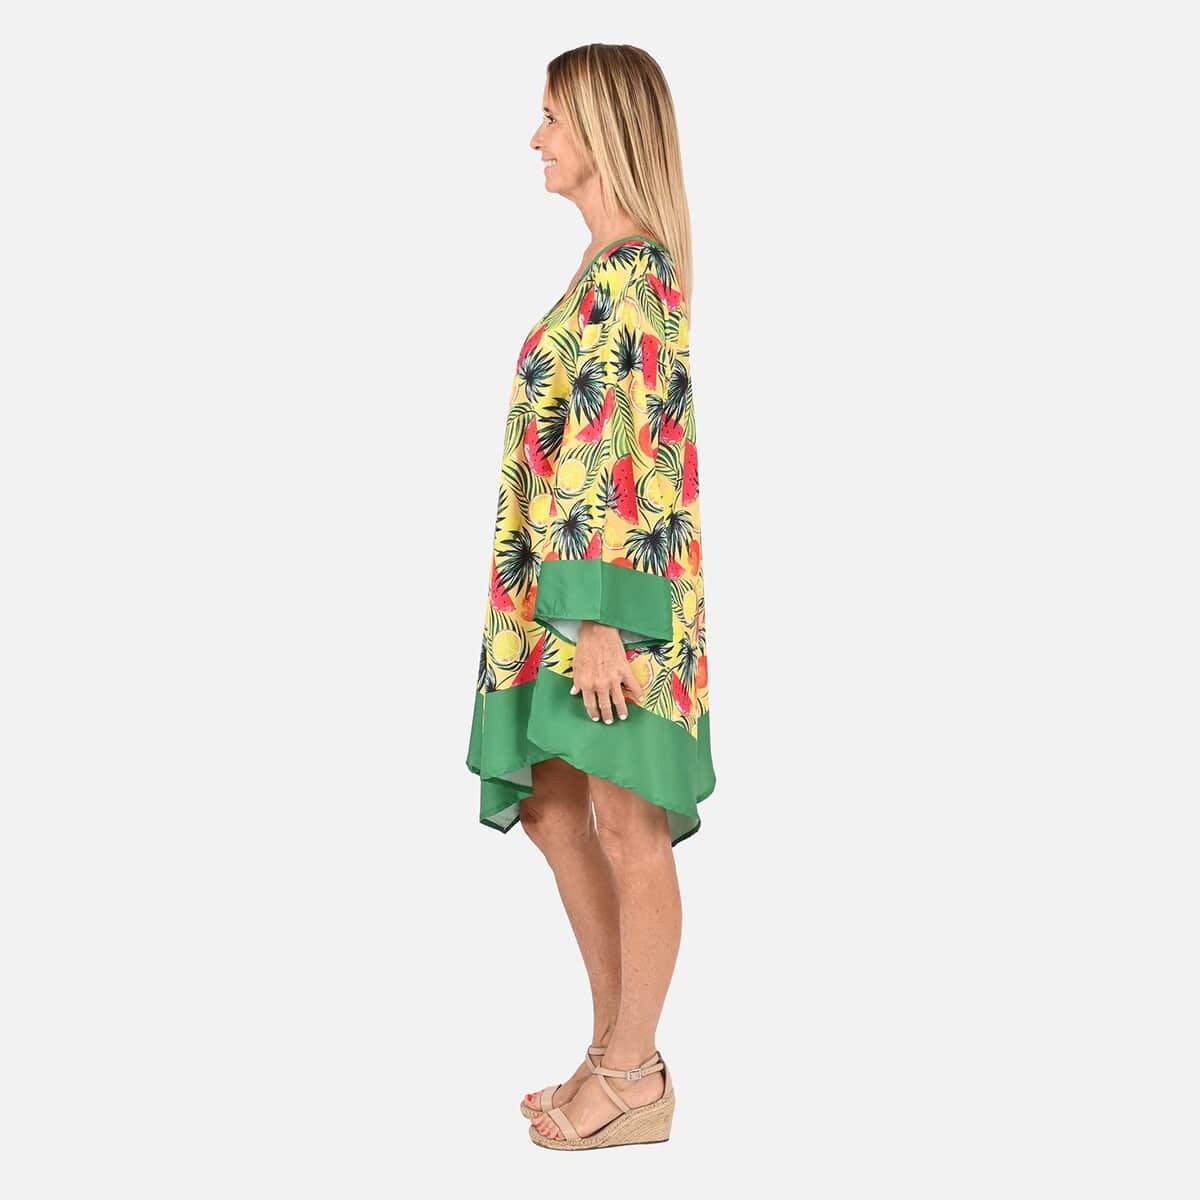 Tamsy Yellow and Green Floral & Fruit Print Handkerchief Kaftan Dress - One Size Fits Most , Holiday Dress , Swimsuit Cover Up , Beach Cover Ups , Holiday Clothes image number 2